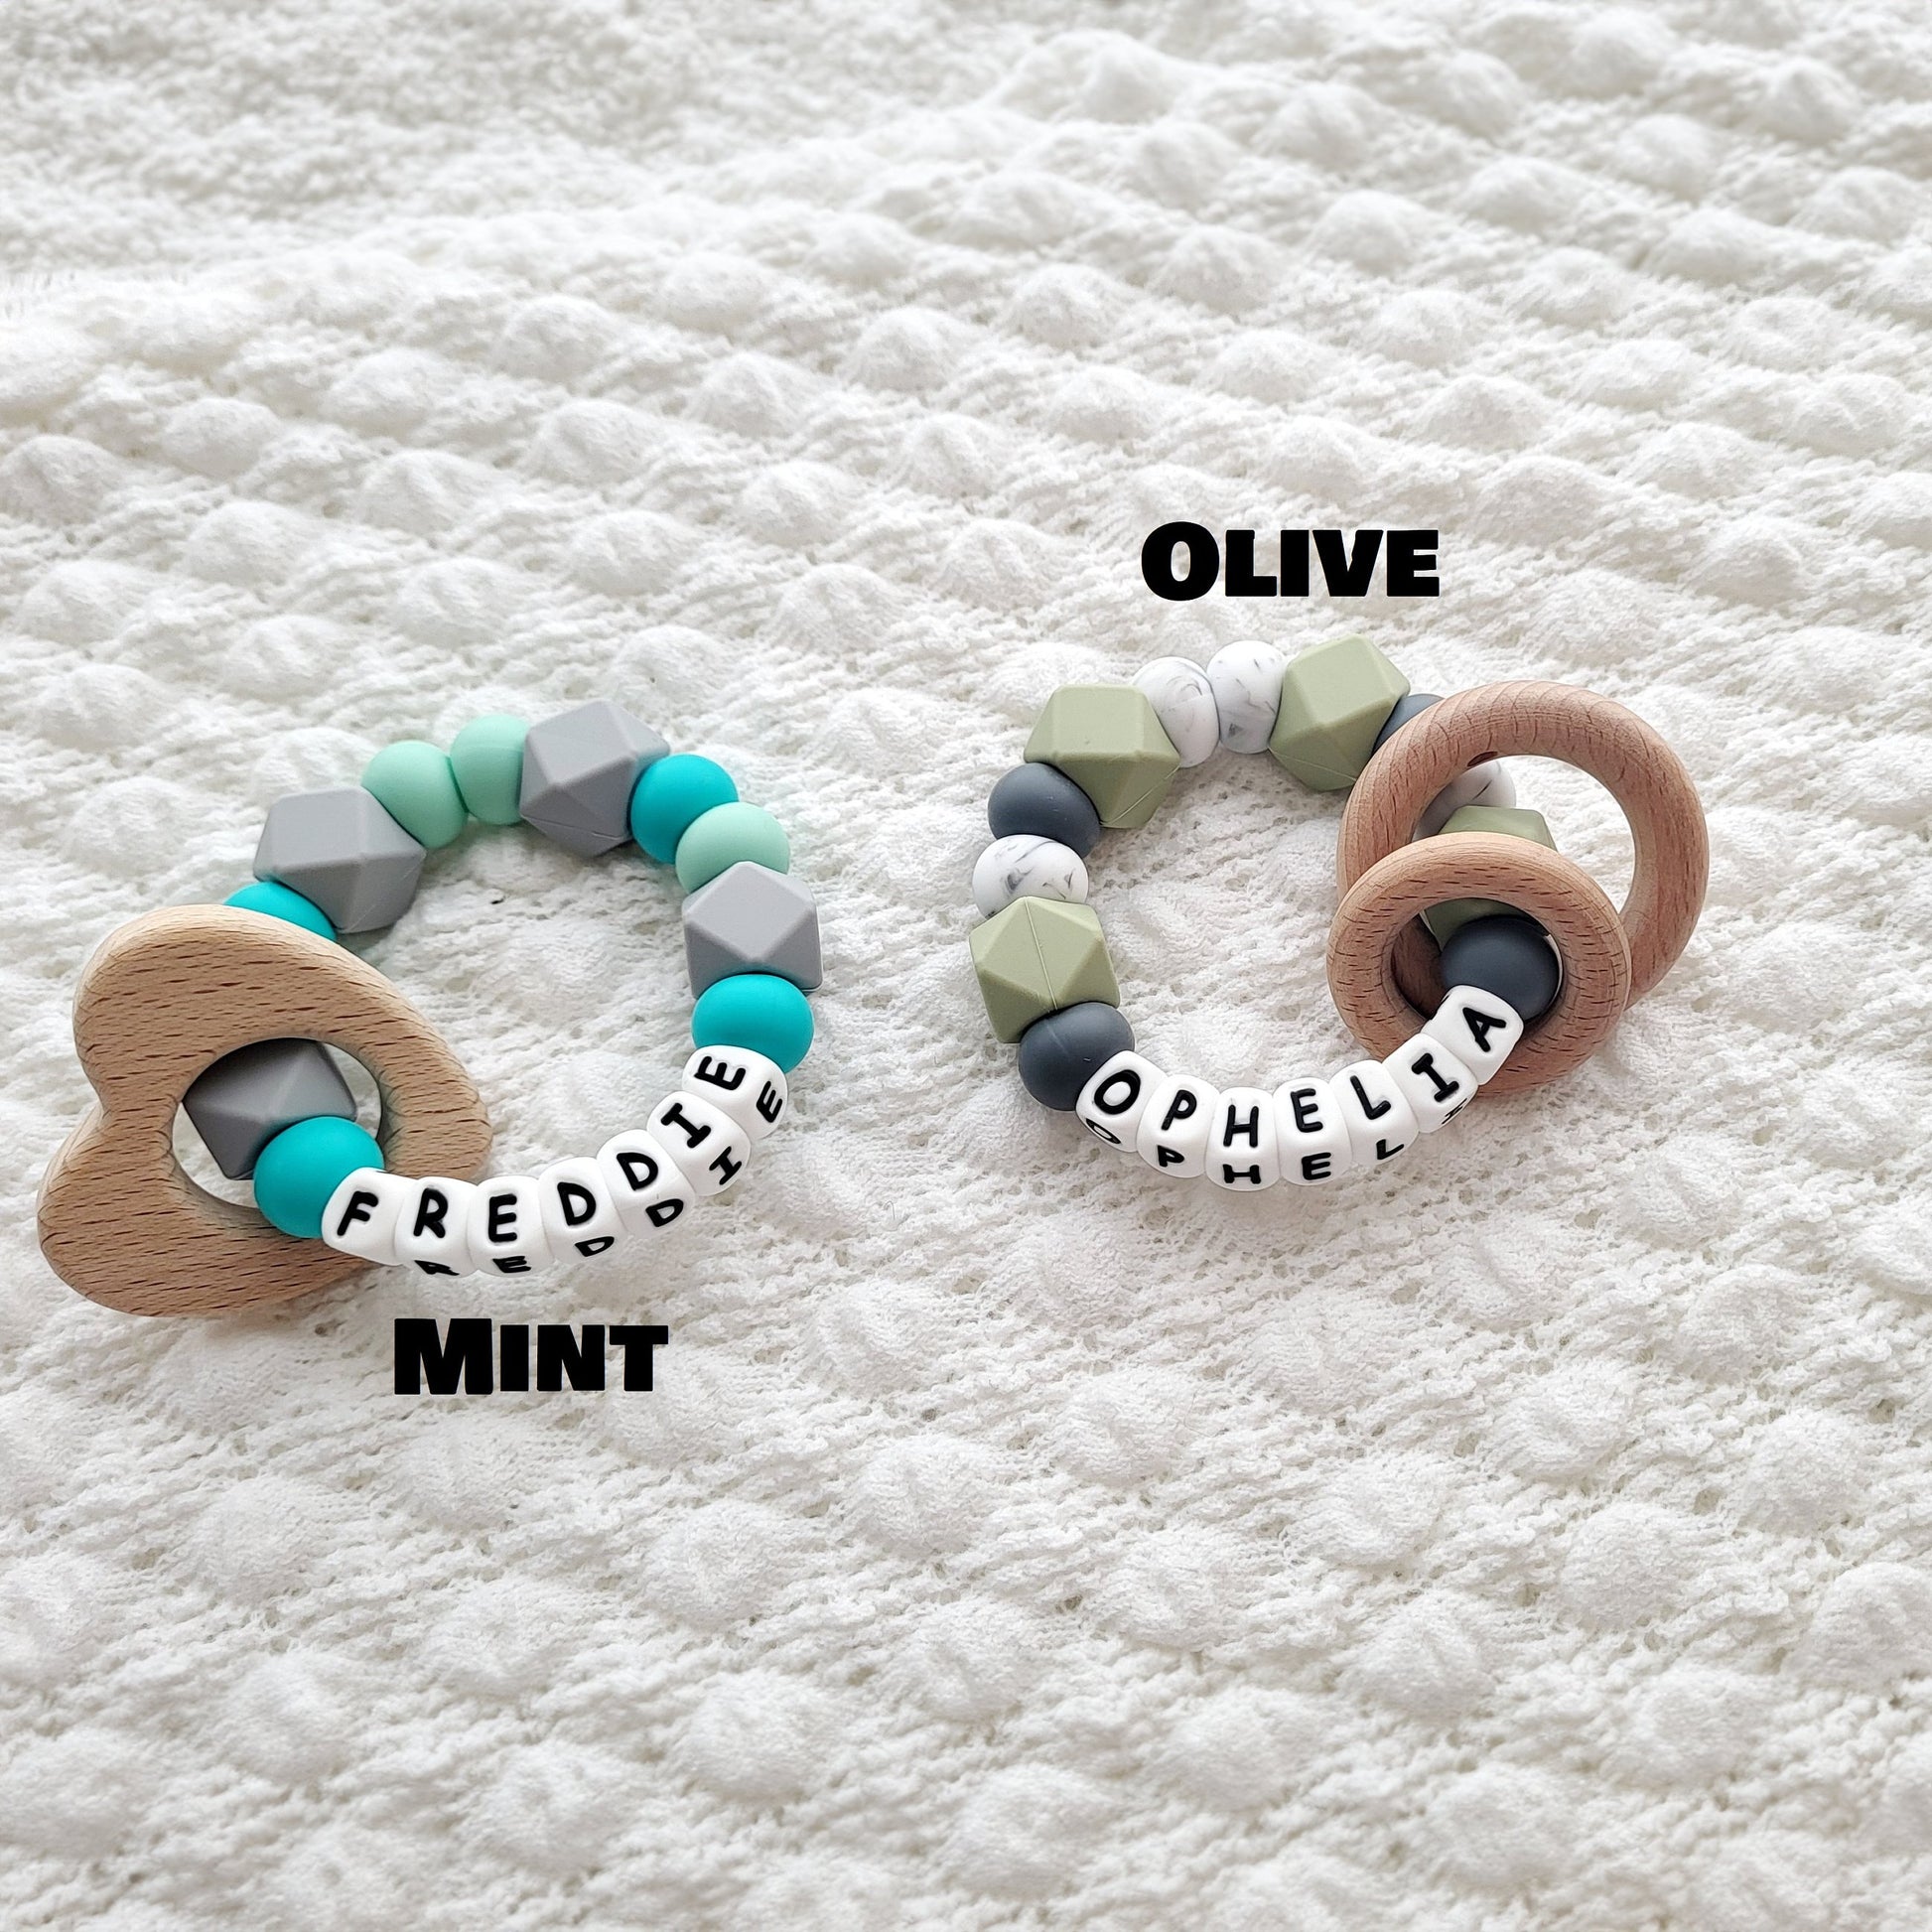 personalized-fiddle-toy-newborn-baby-gifts-olive-mint